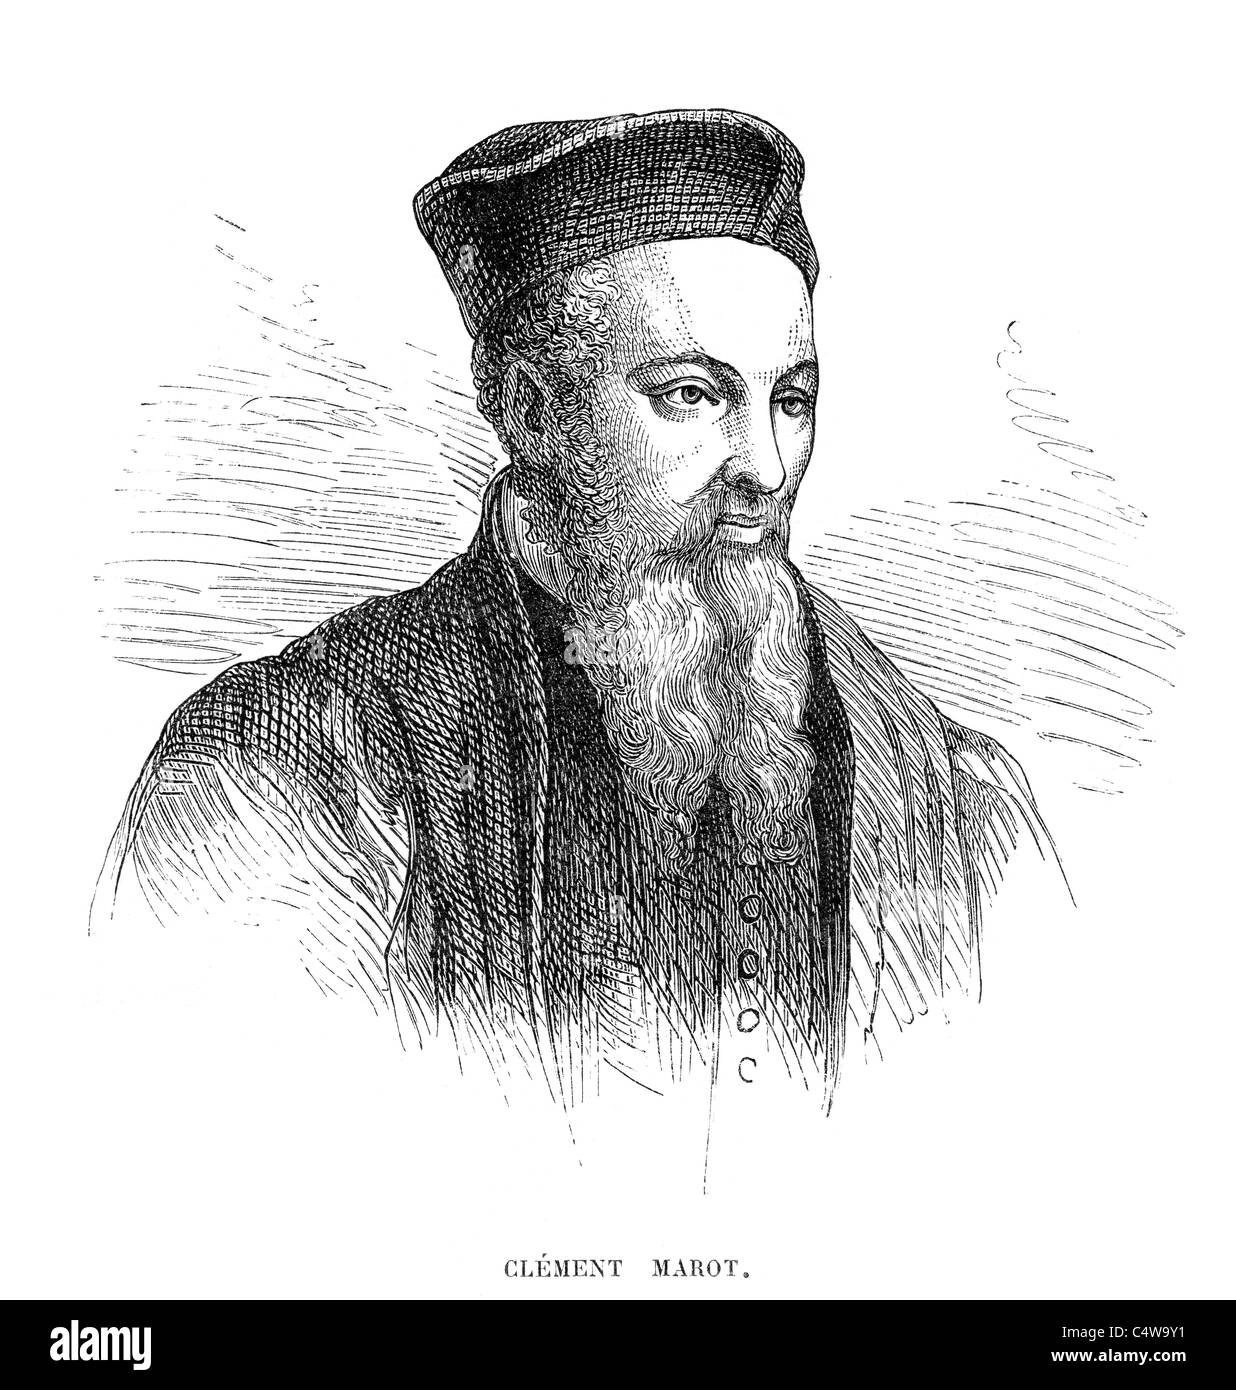 Clément Marot 23 November 1496 to 12 September 1544 was a French poet of the Renaissance period. Stock Photo